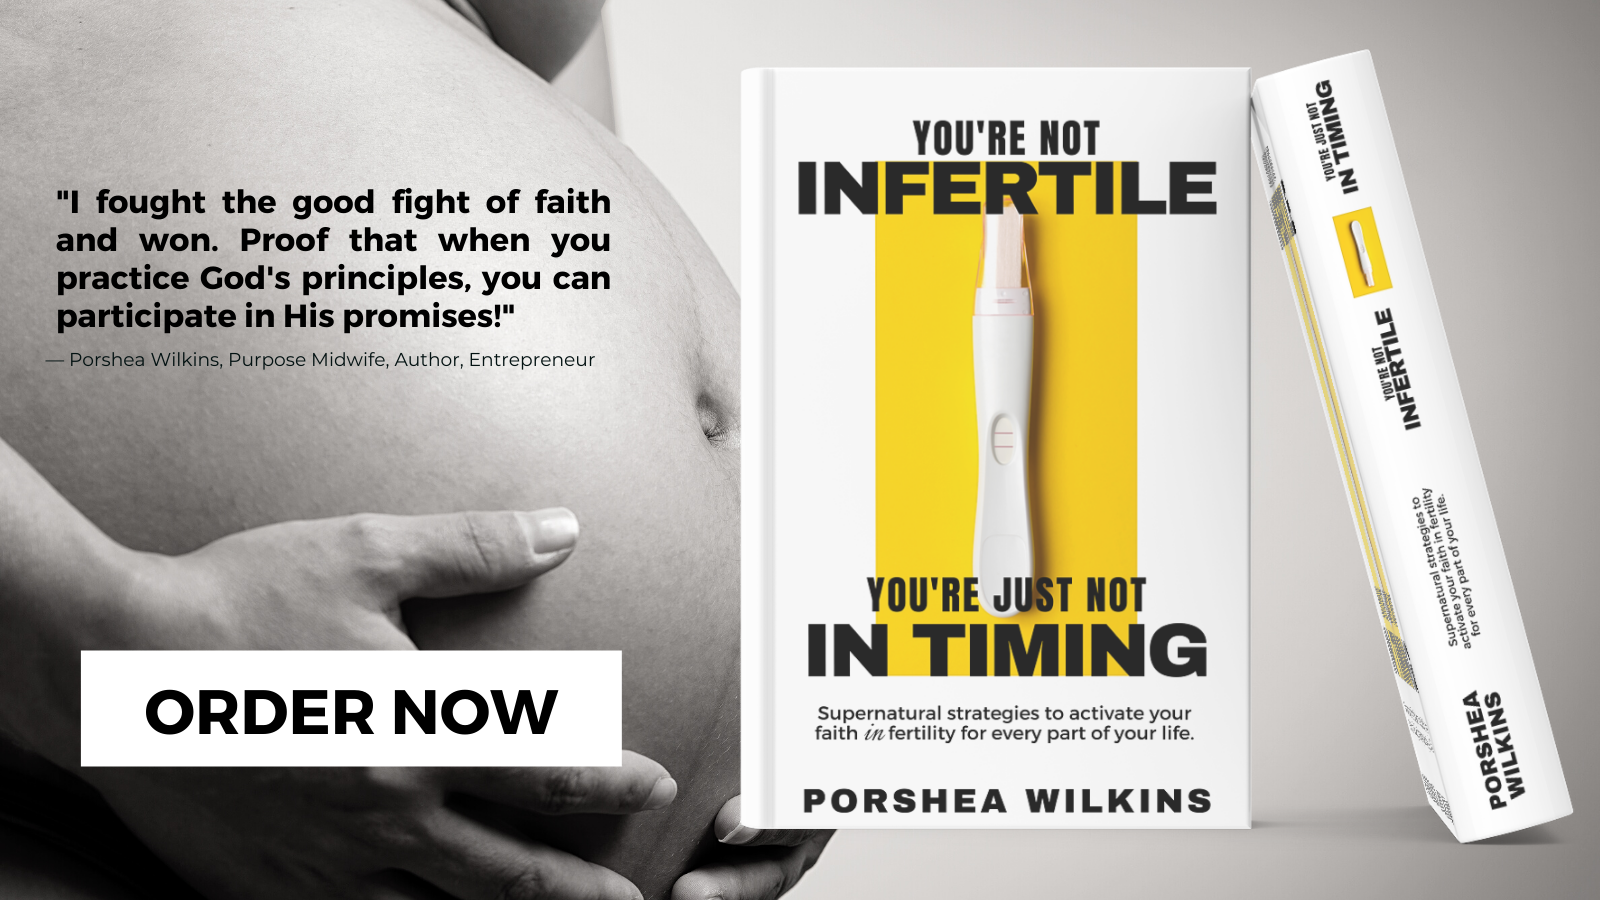 YOU’RE NOT INFERTILE. YOU’RE JUST NOT IN TIMING.